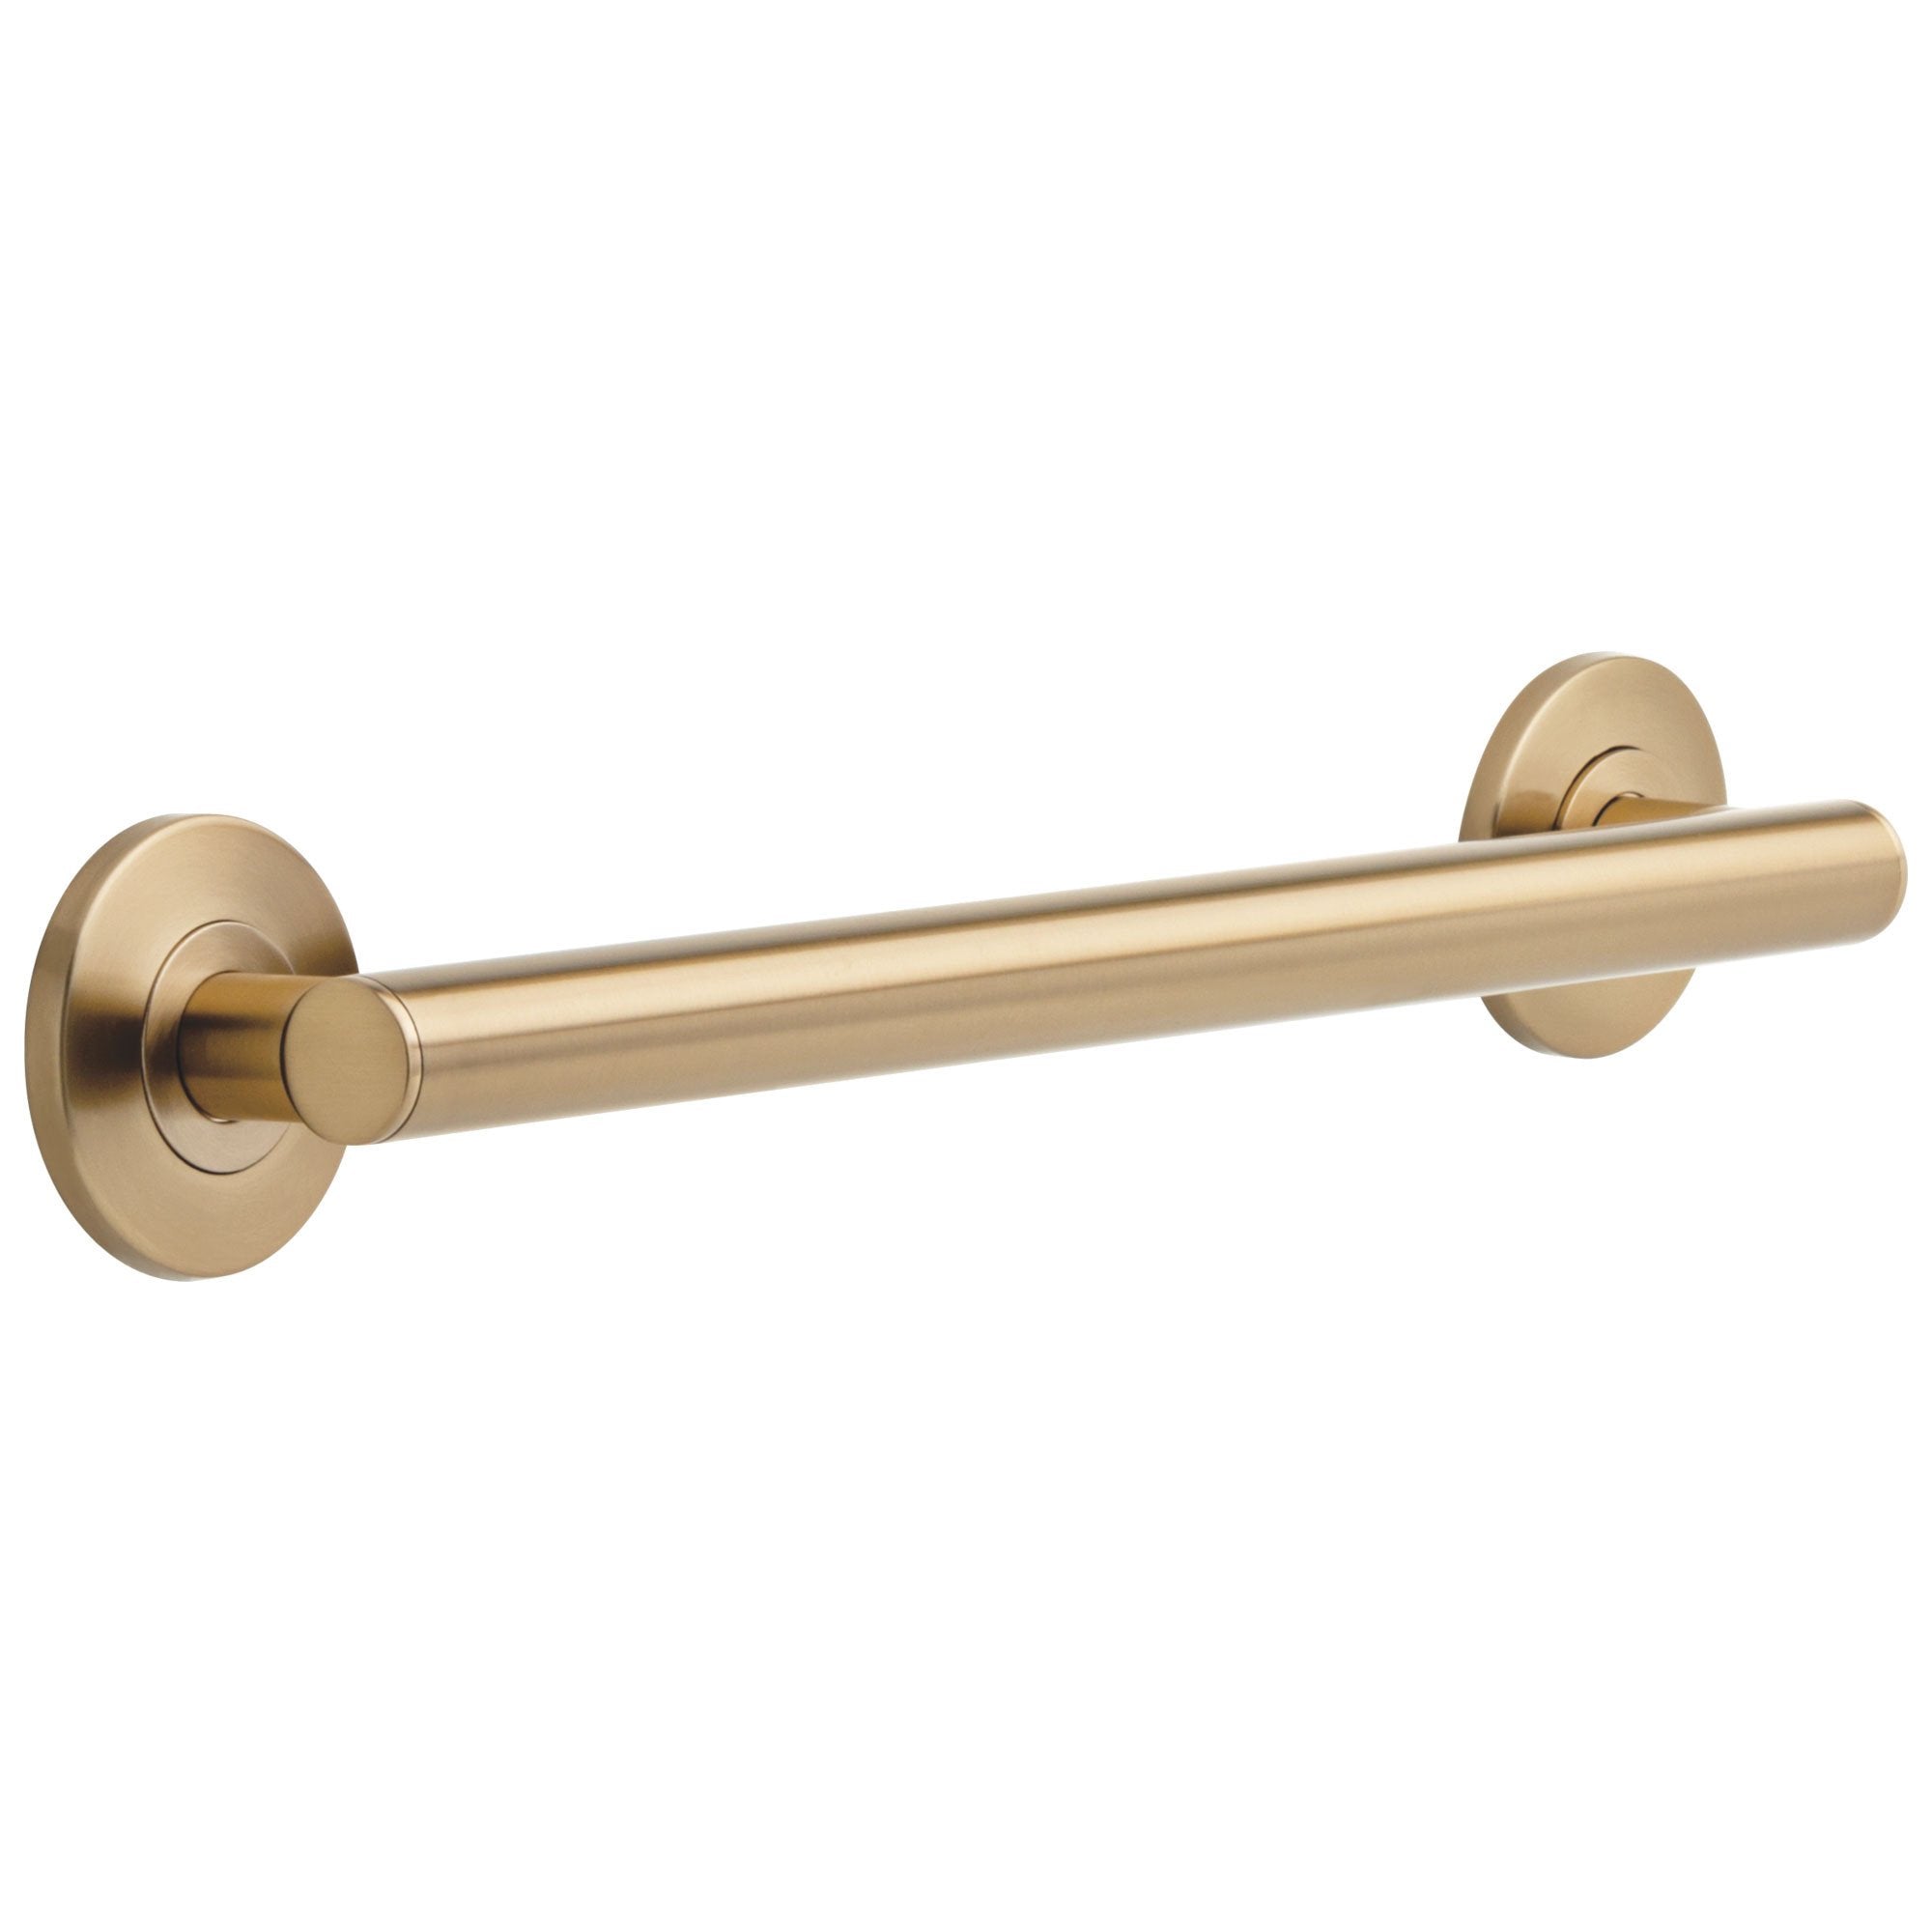 Delta Bath Safety Collection Champagne Bronze Finish Contemporary Wall Mounted Decorative Bathroom ADA Approved 18" Grab Bar D41818CZ